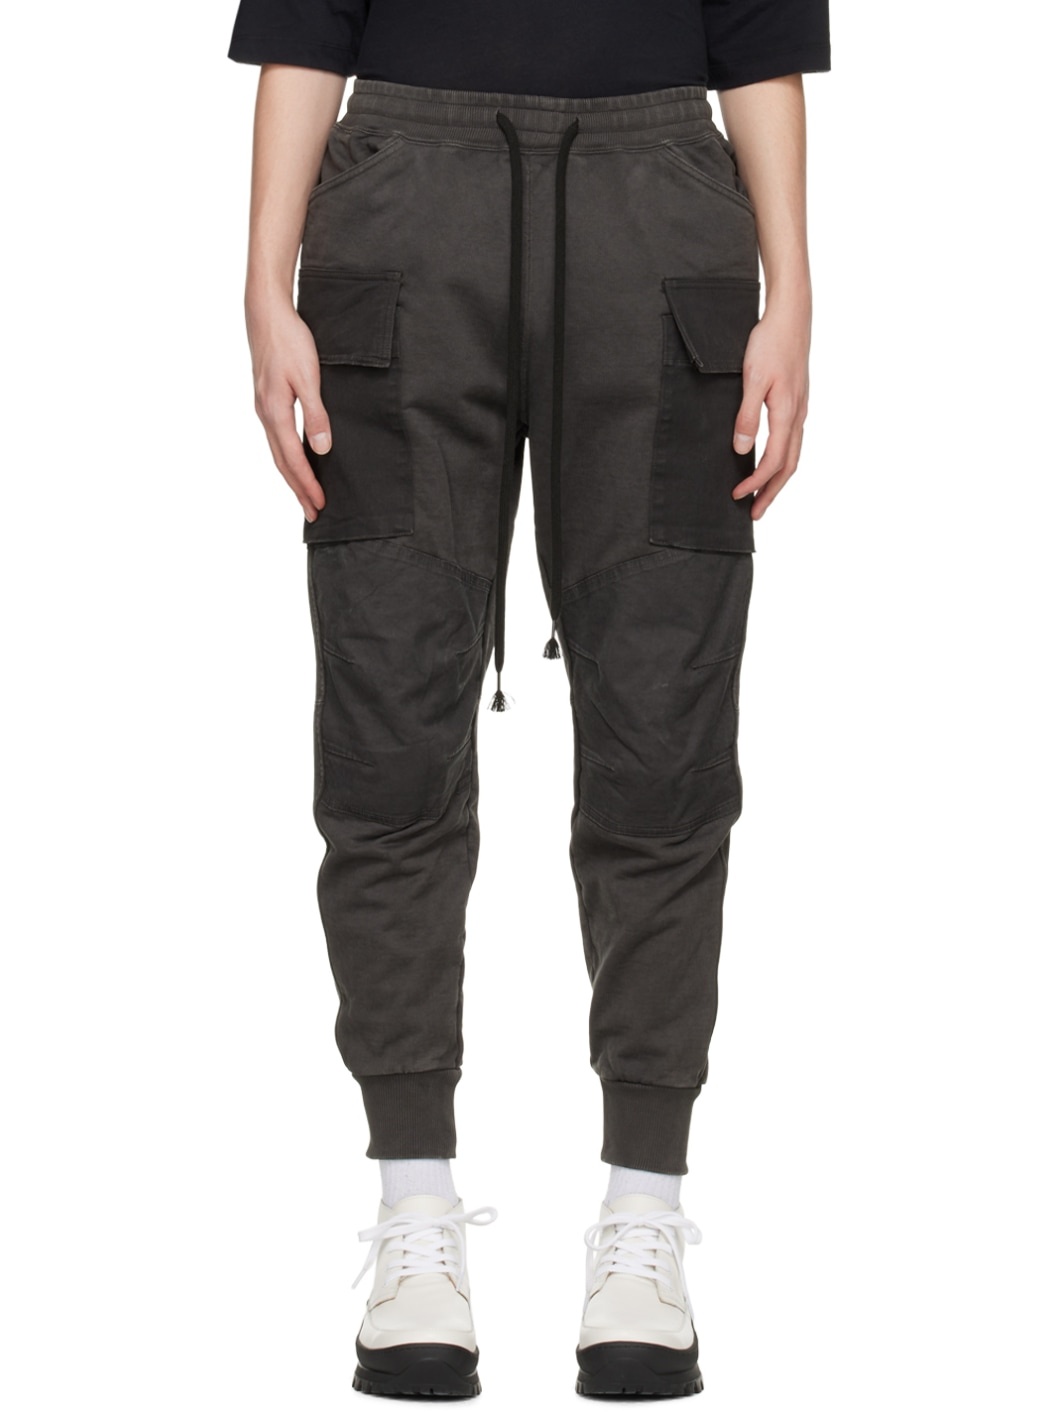 Gray Dyed Cargo Pants - 1